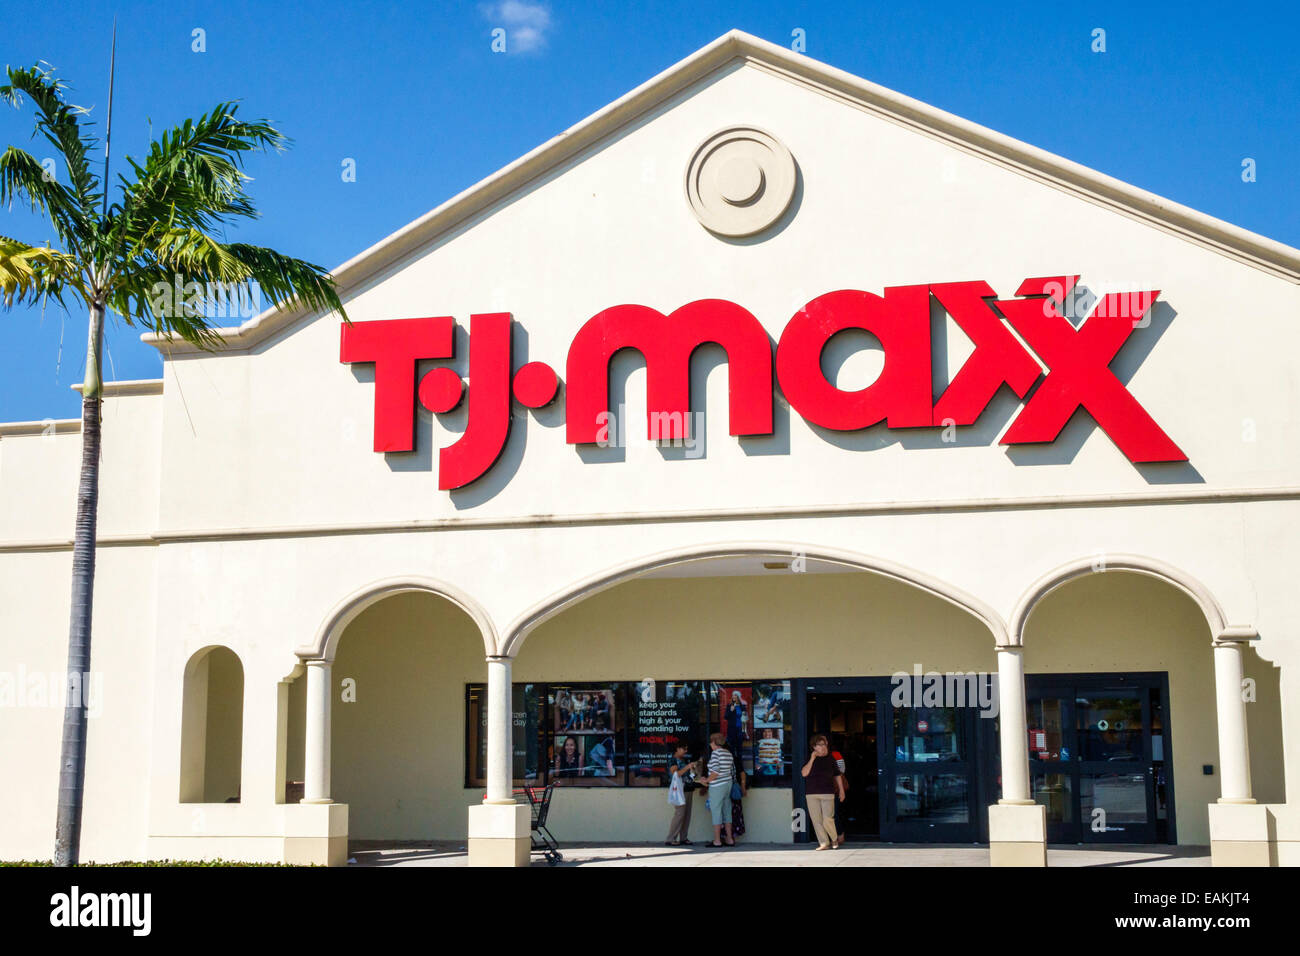 T J Maxx High Resolution Stock Photography and Images - Alamy